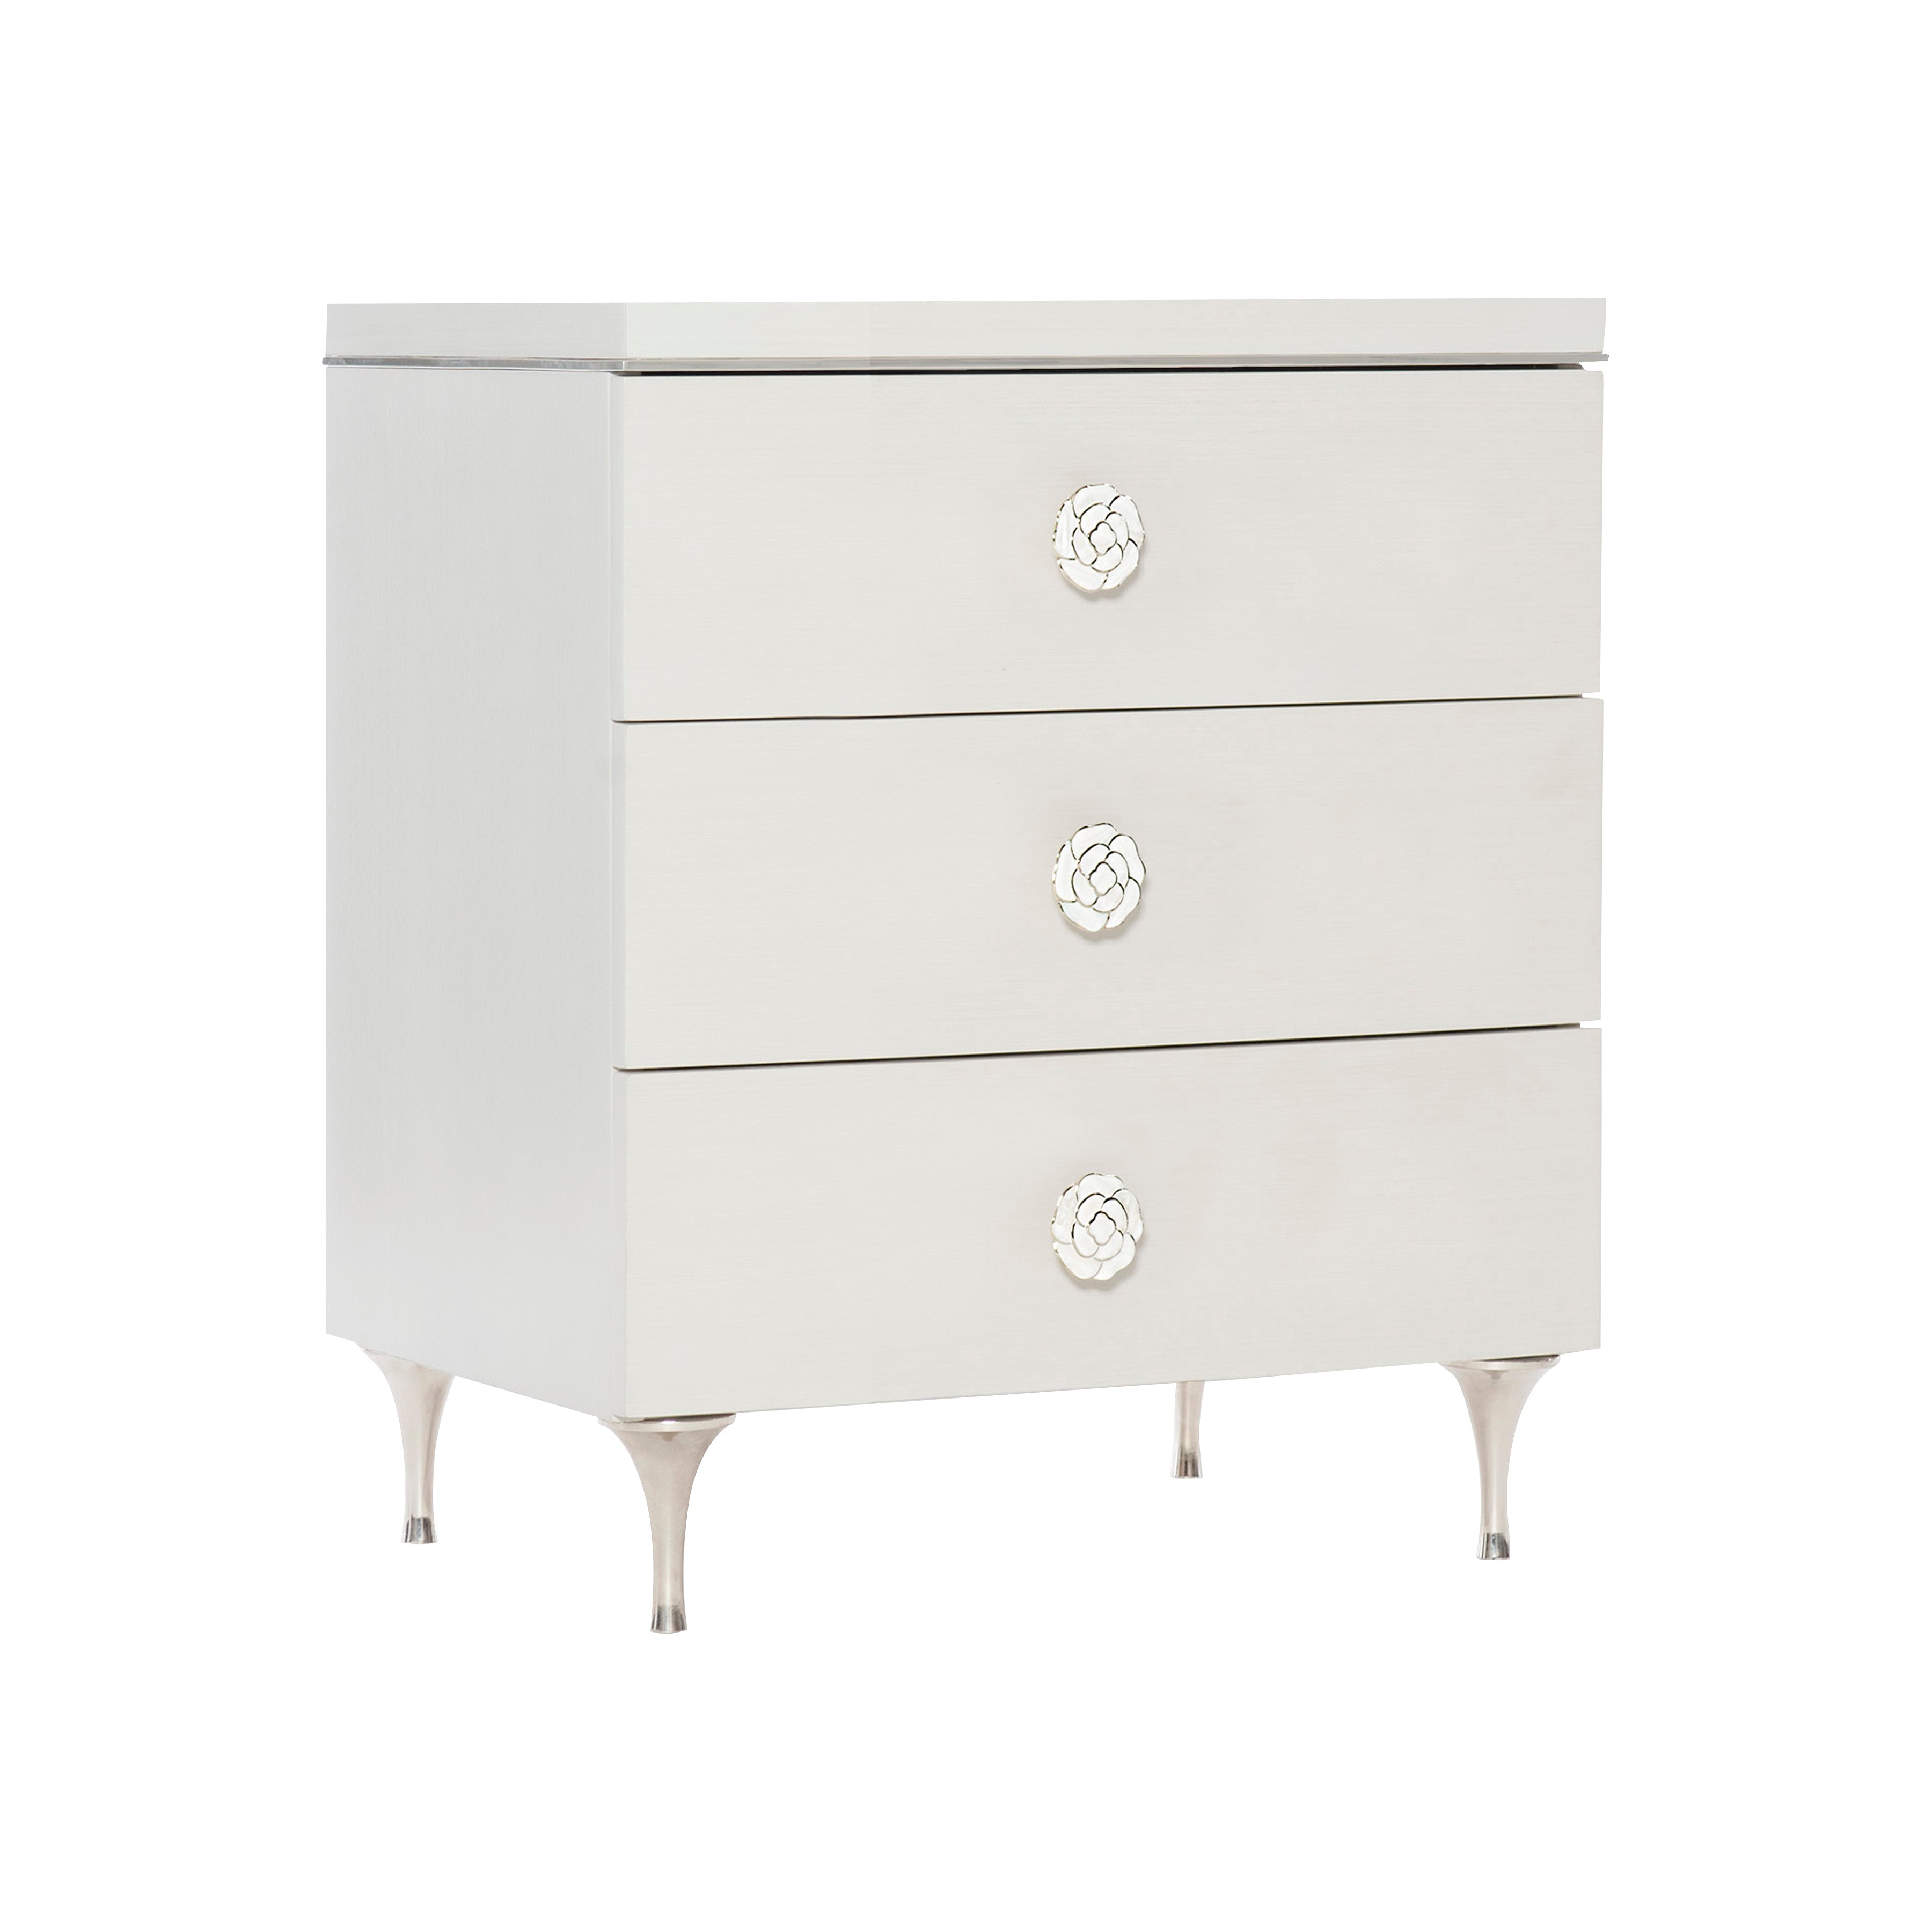 Silhouette Nightstand in Eggshell Finish (26 inch)